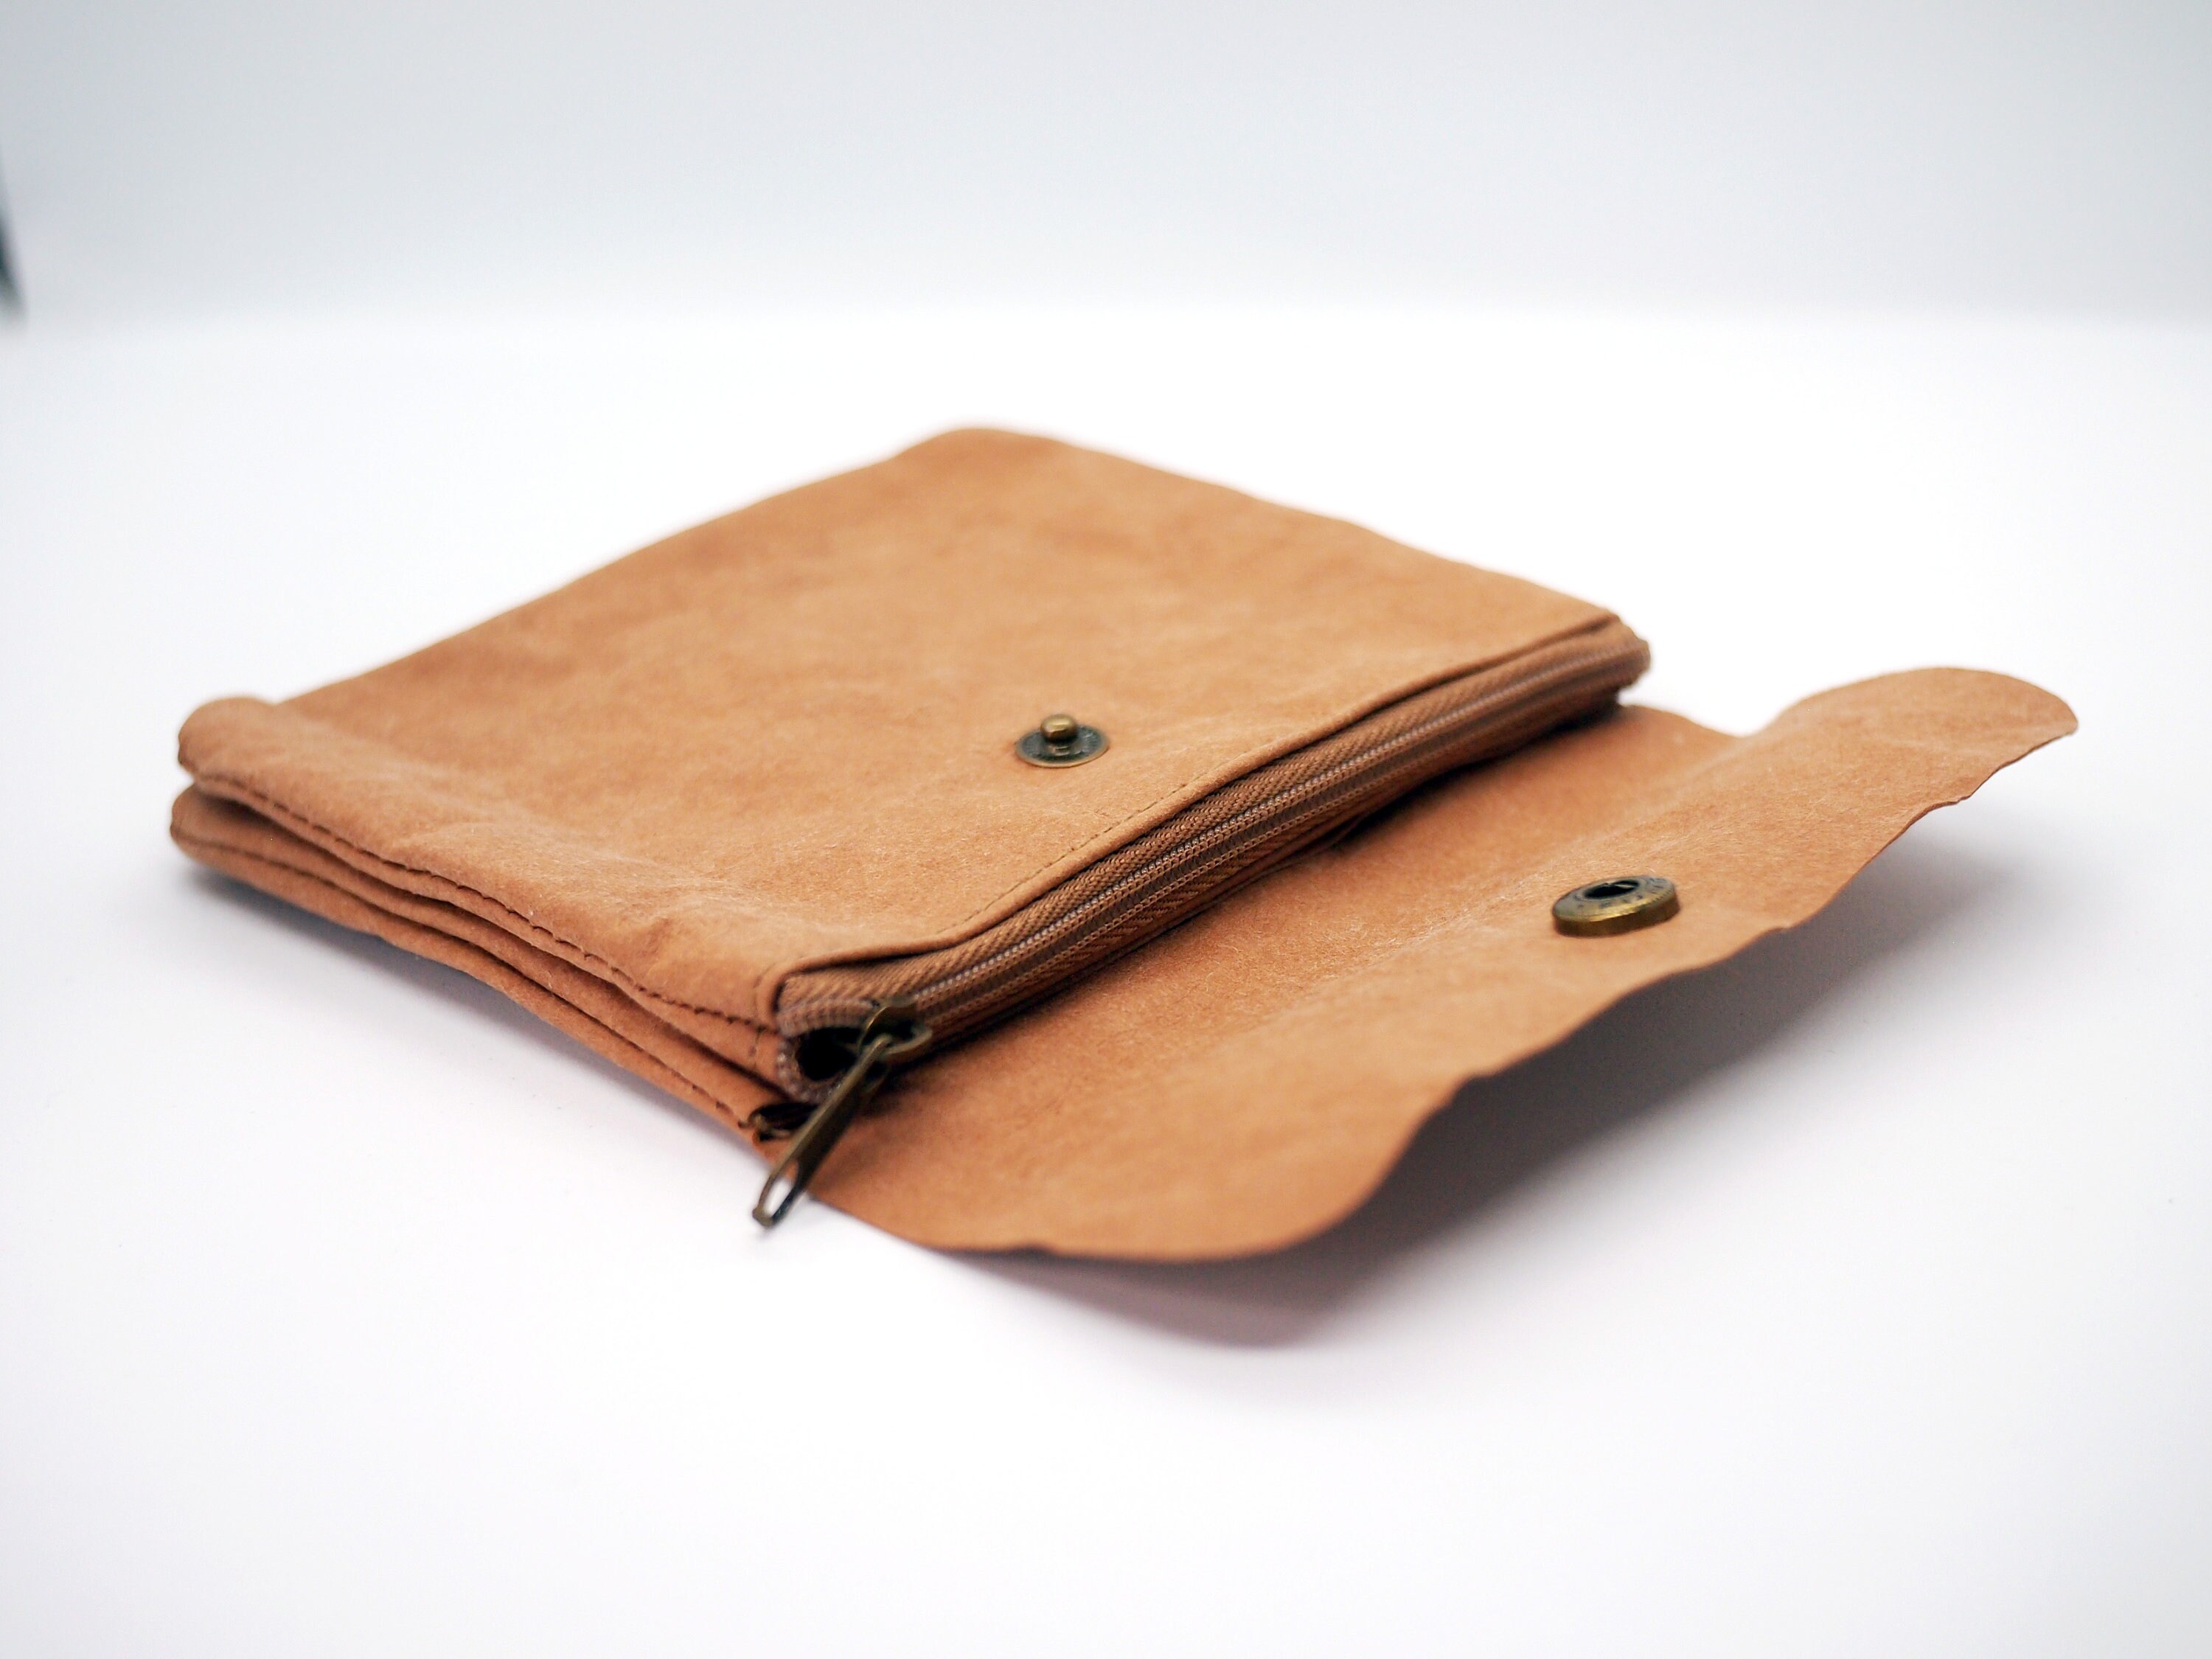 Mini-pencil Case / Etui / Toiletry Bag Made From Kraft Paper 